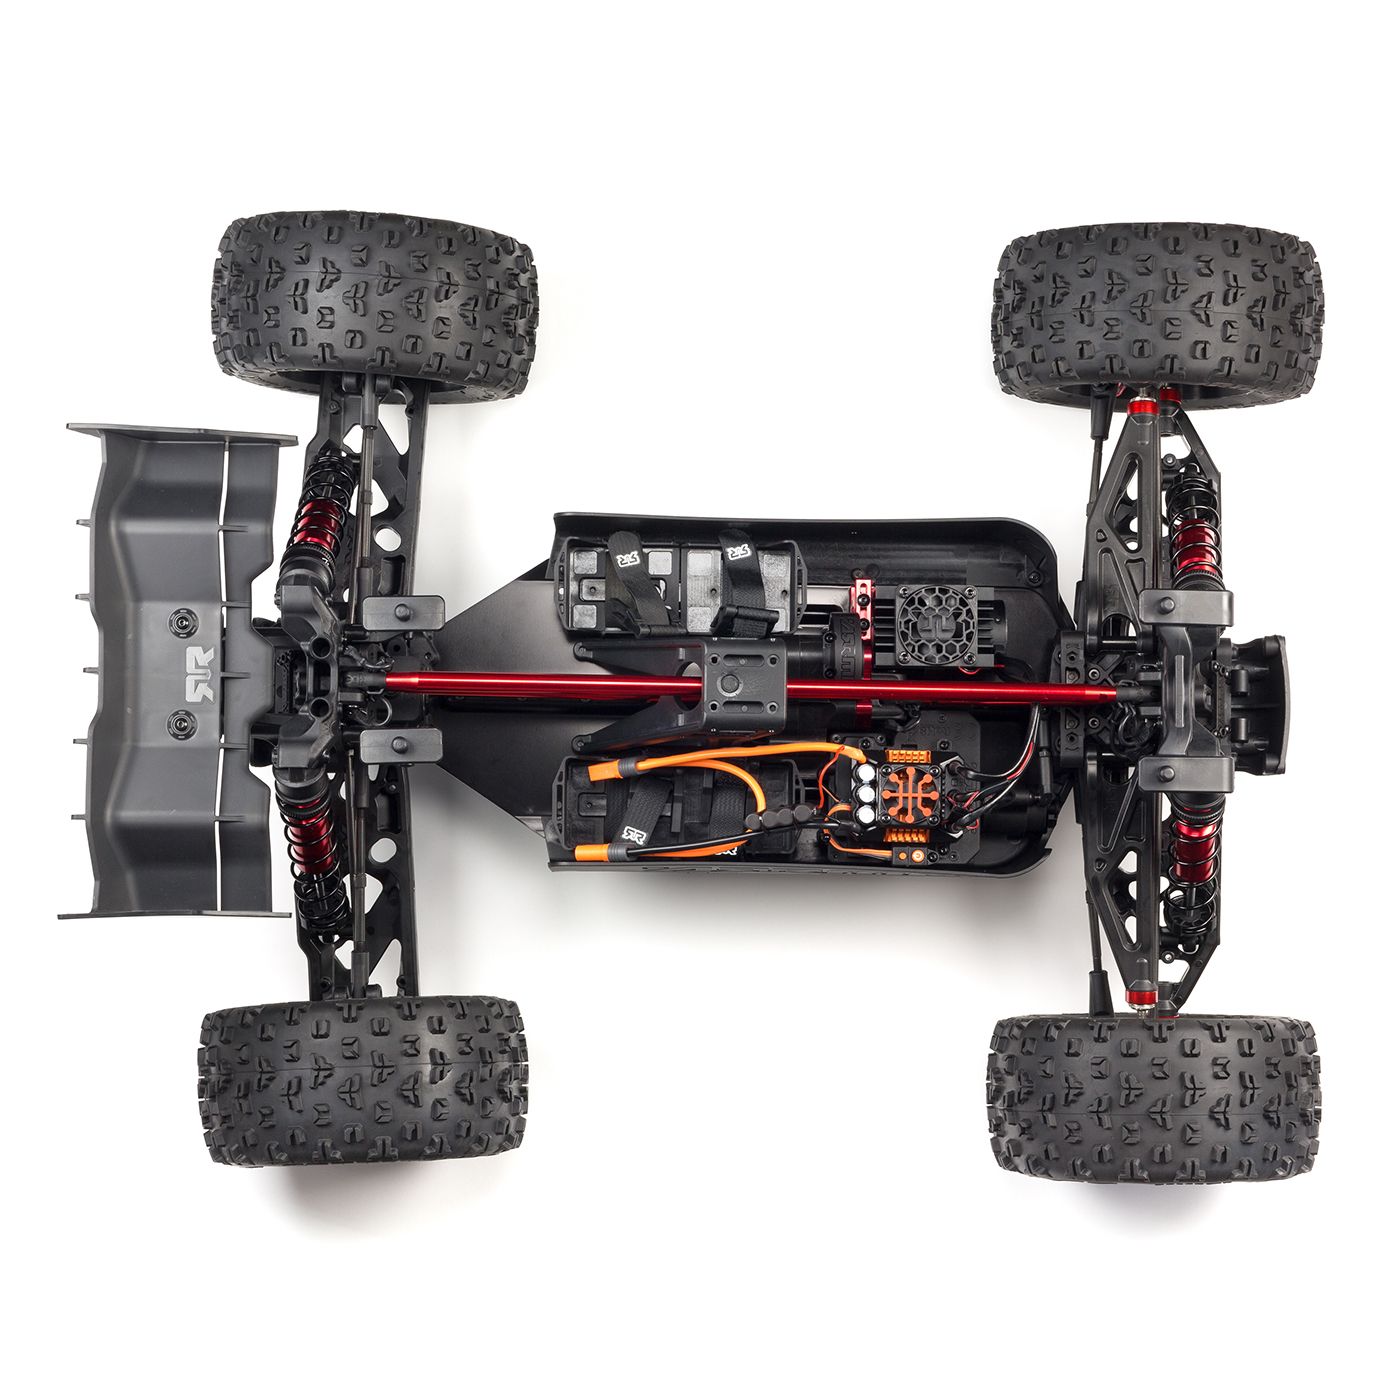 ARRMA Kraton 8S BLX Speed Truck - Chassis Top